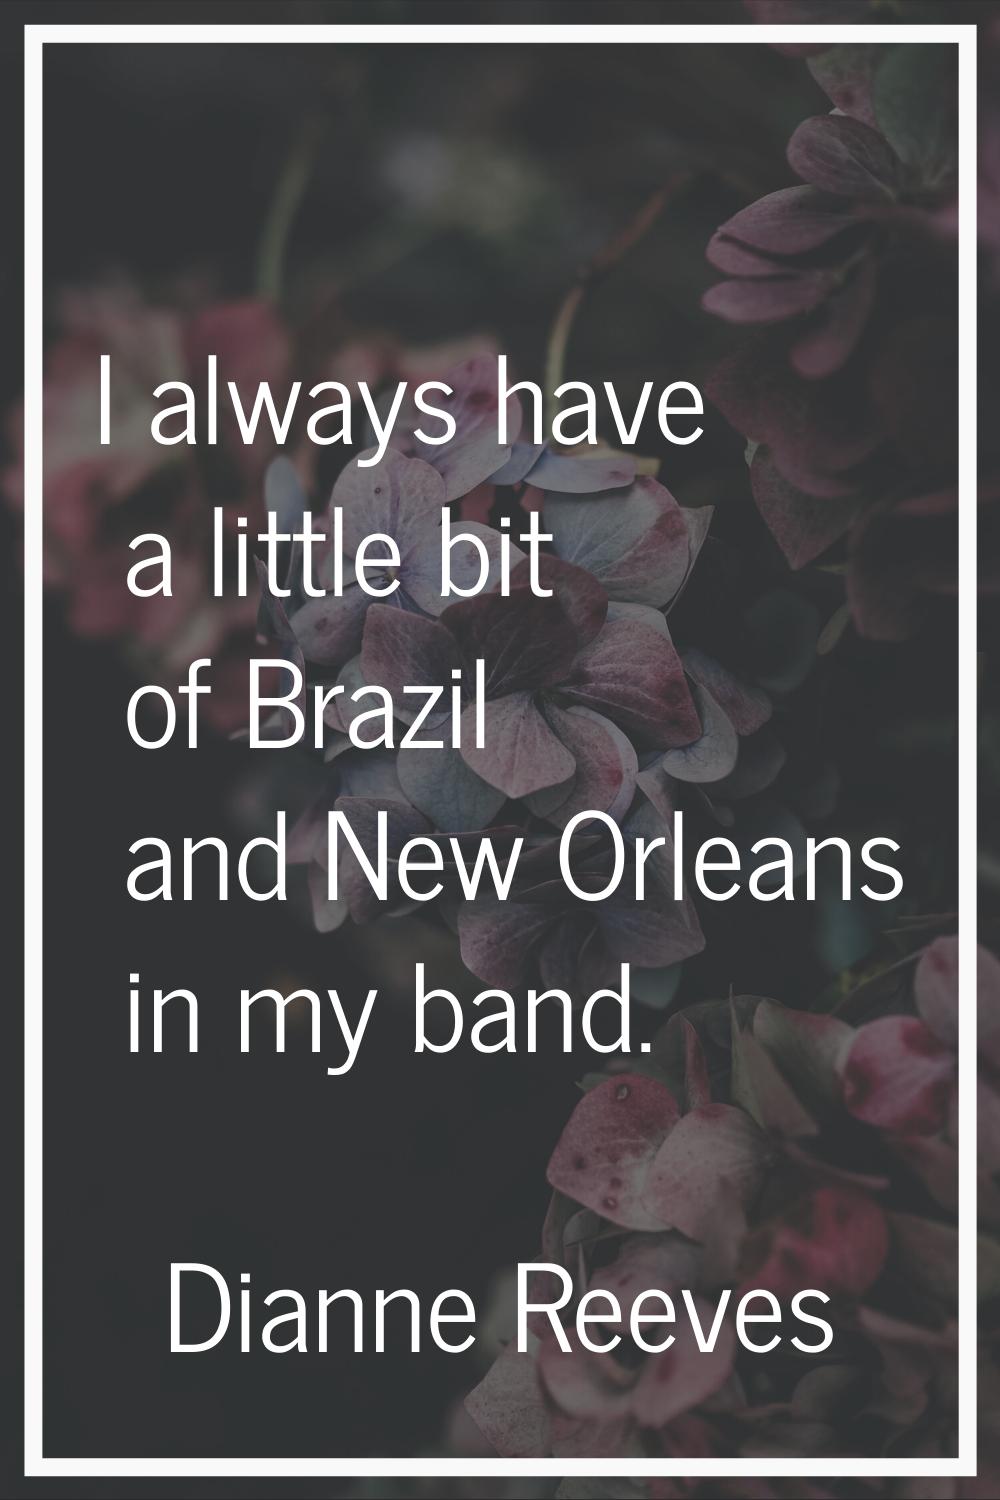 I always have a little bit of Brazil and New Orleans in my band.